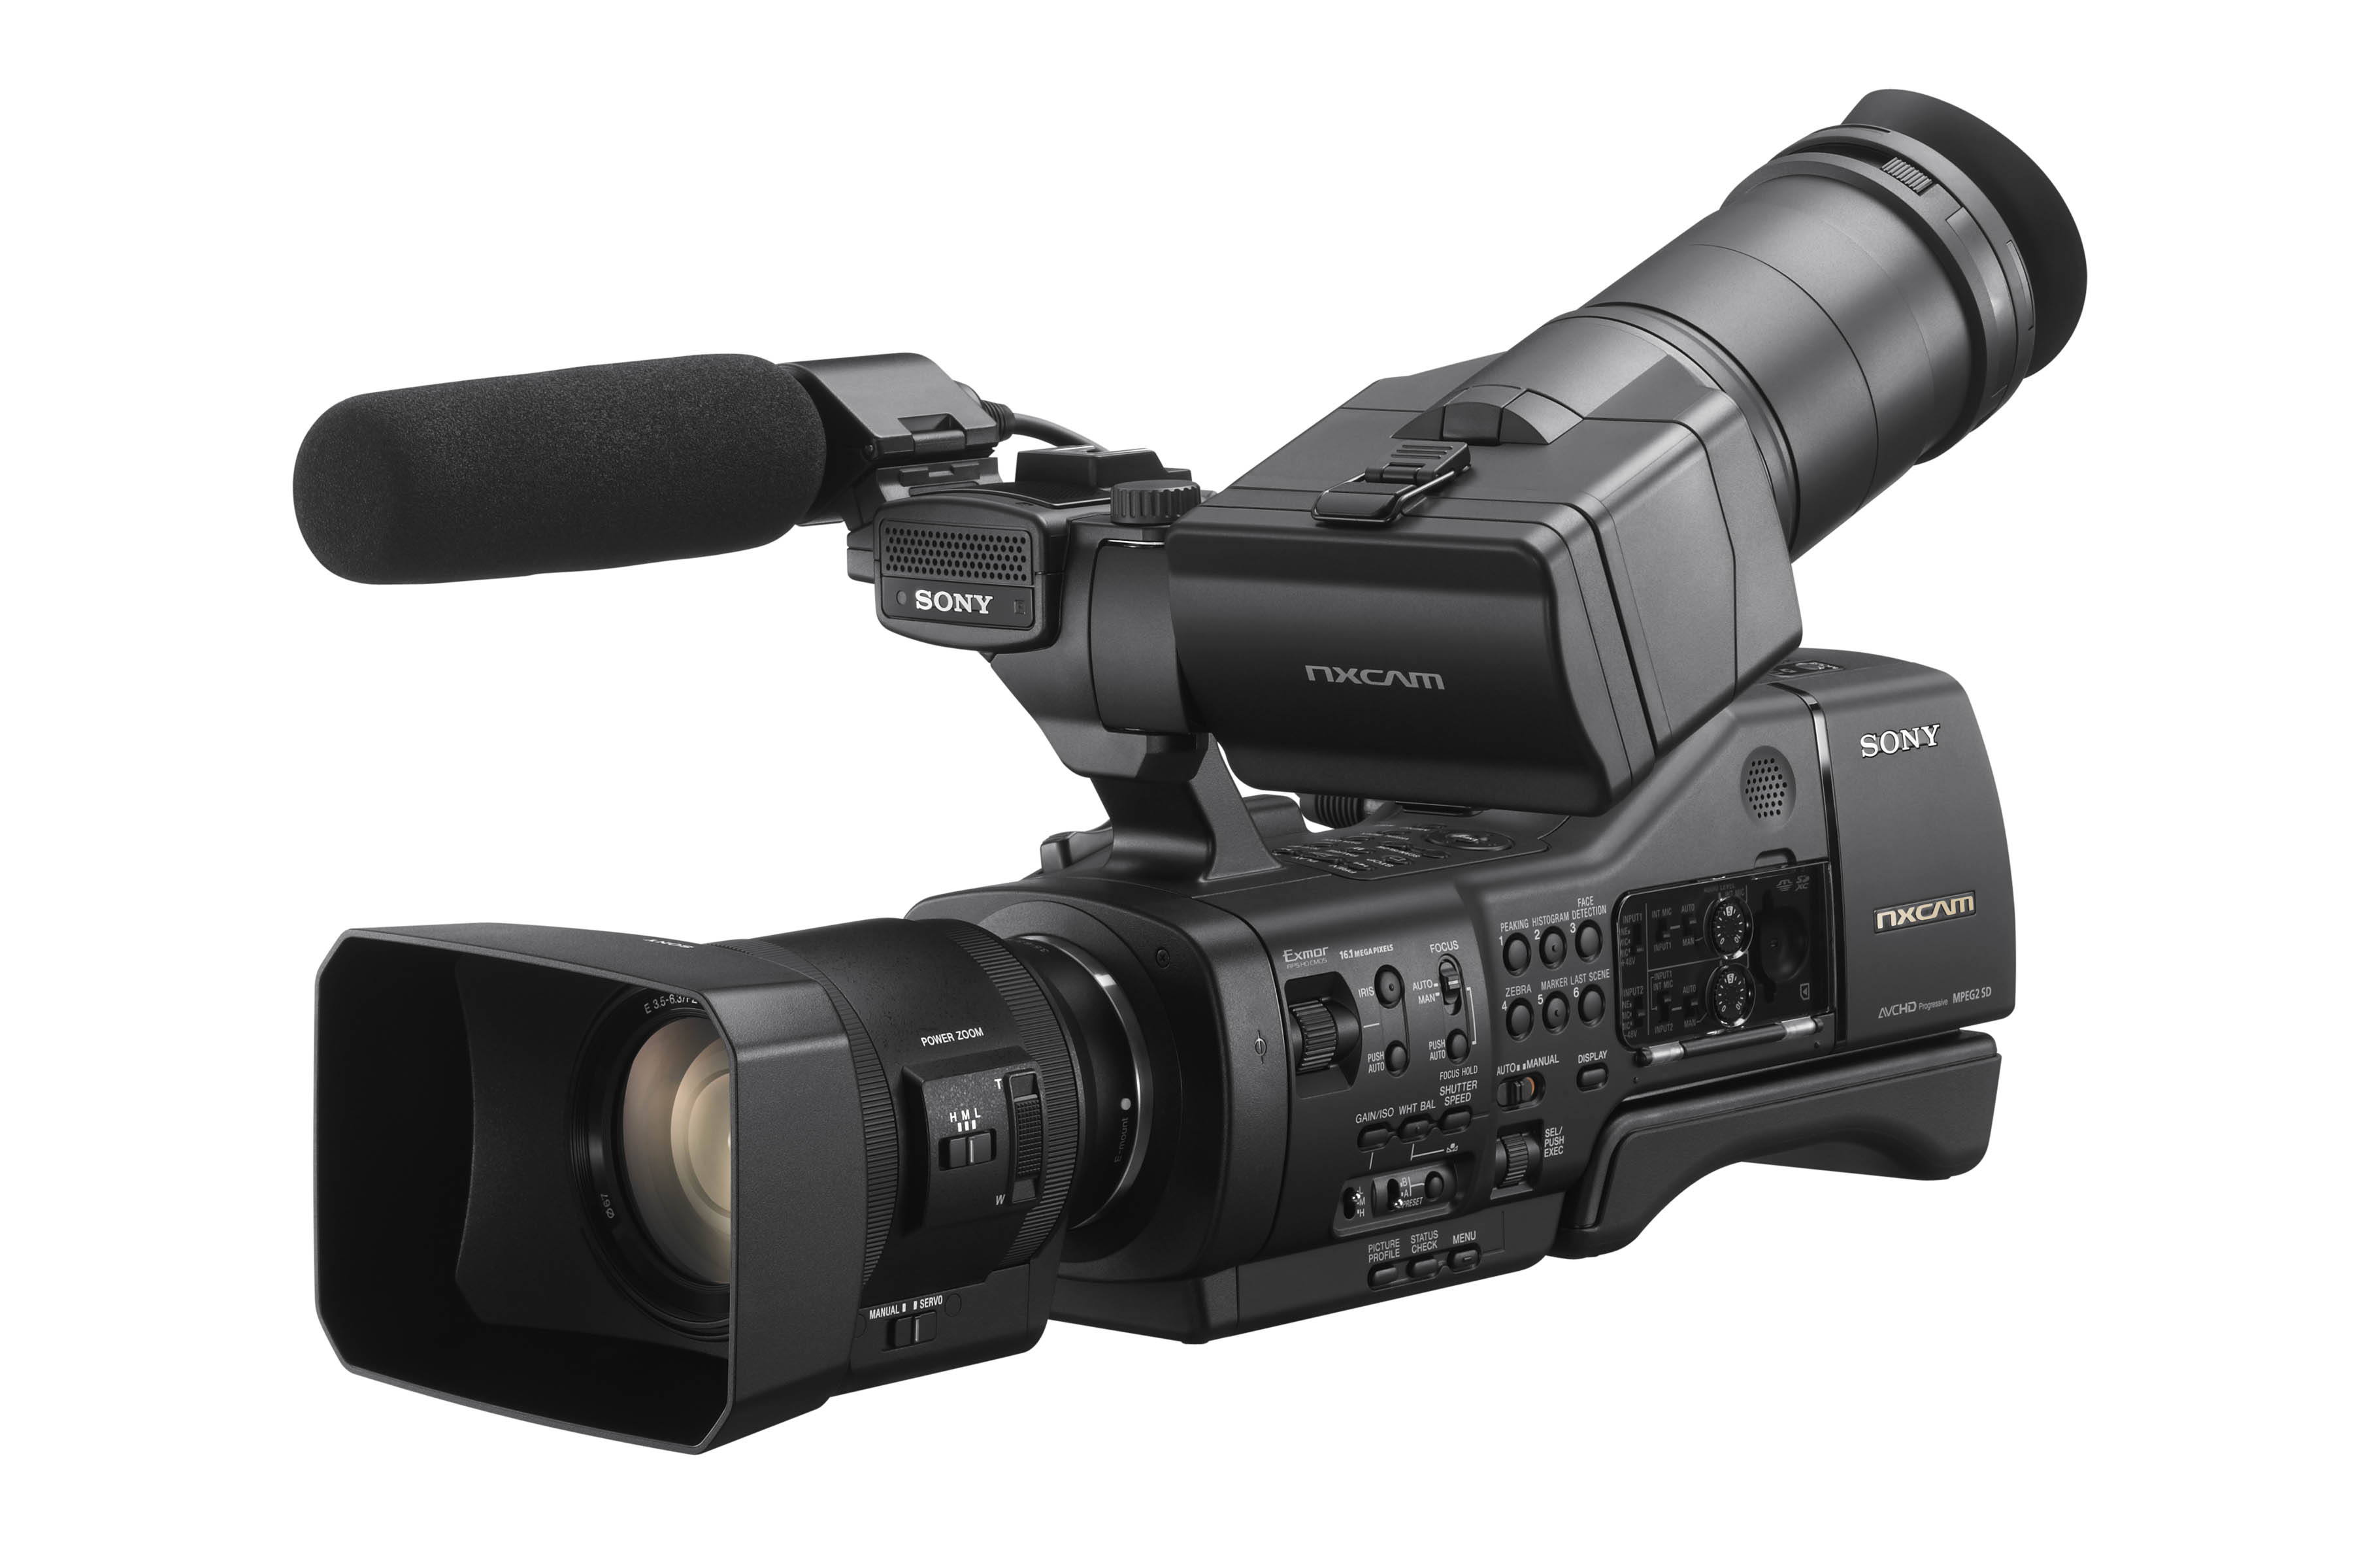 The Sony NEX-EA50: What it is and what it isn’t